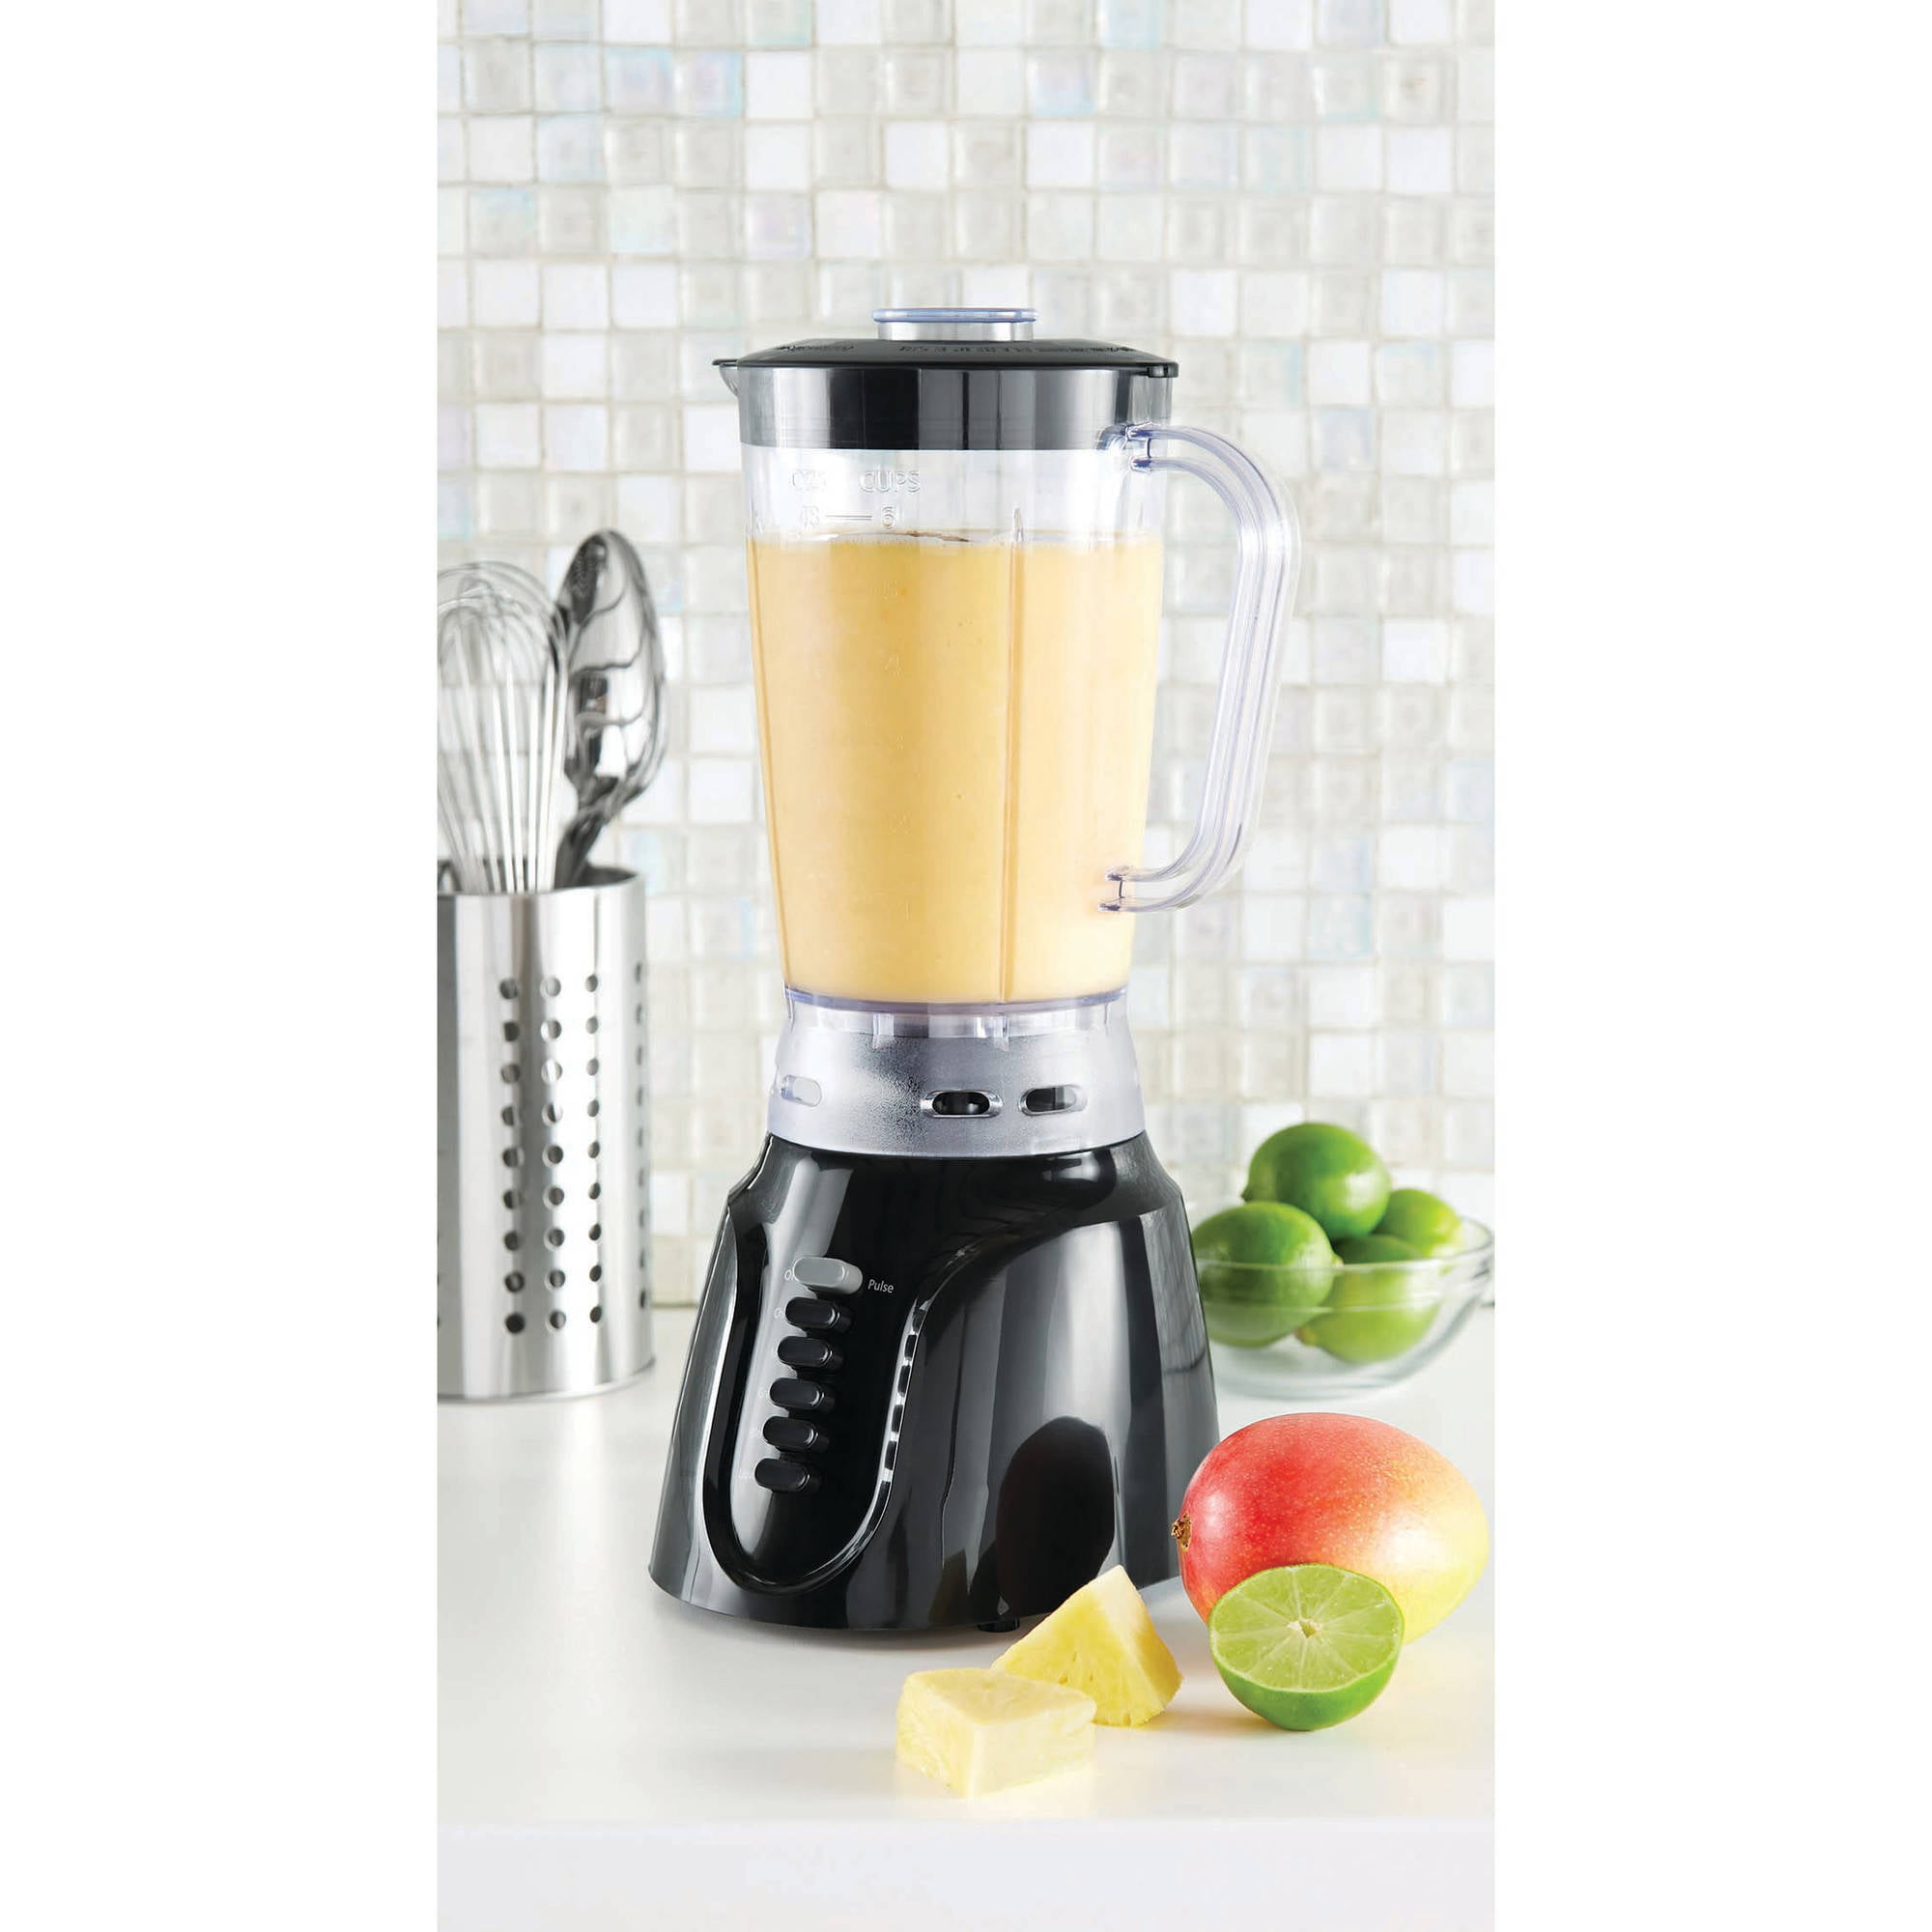 Mainstays MS-BL6-BLK Replacement Blender Pitcher With Lid and Blade